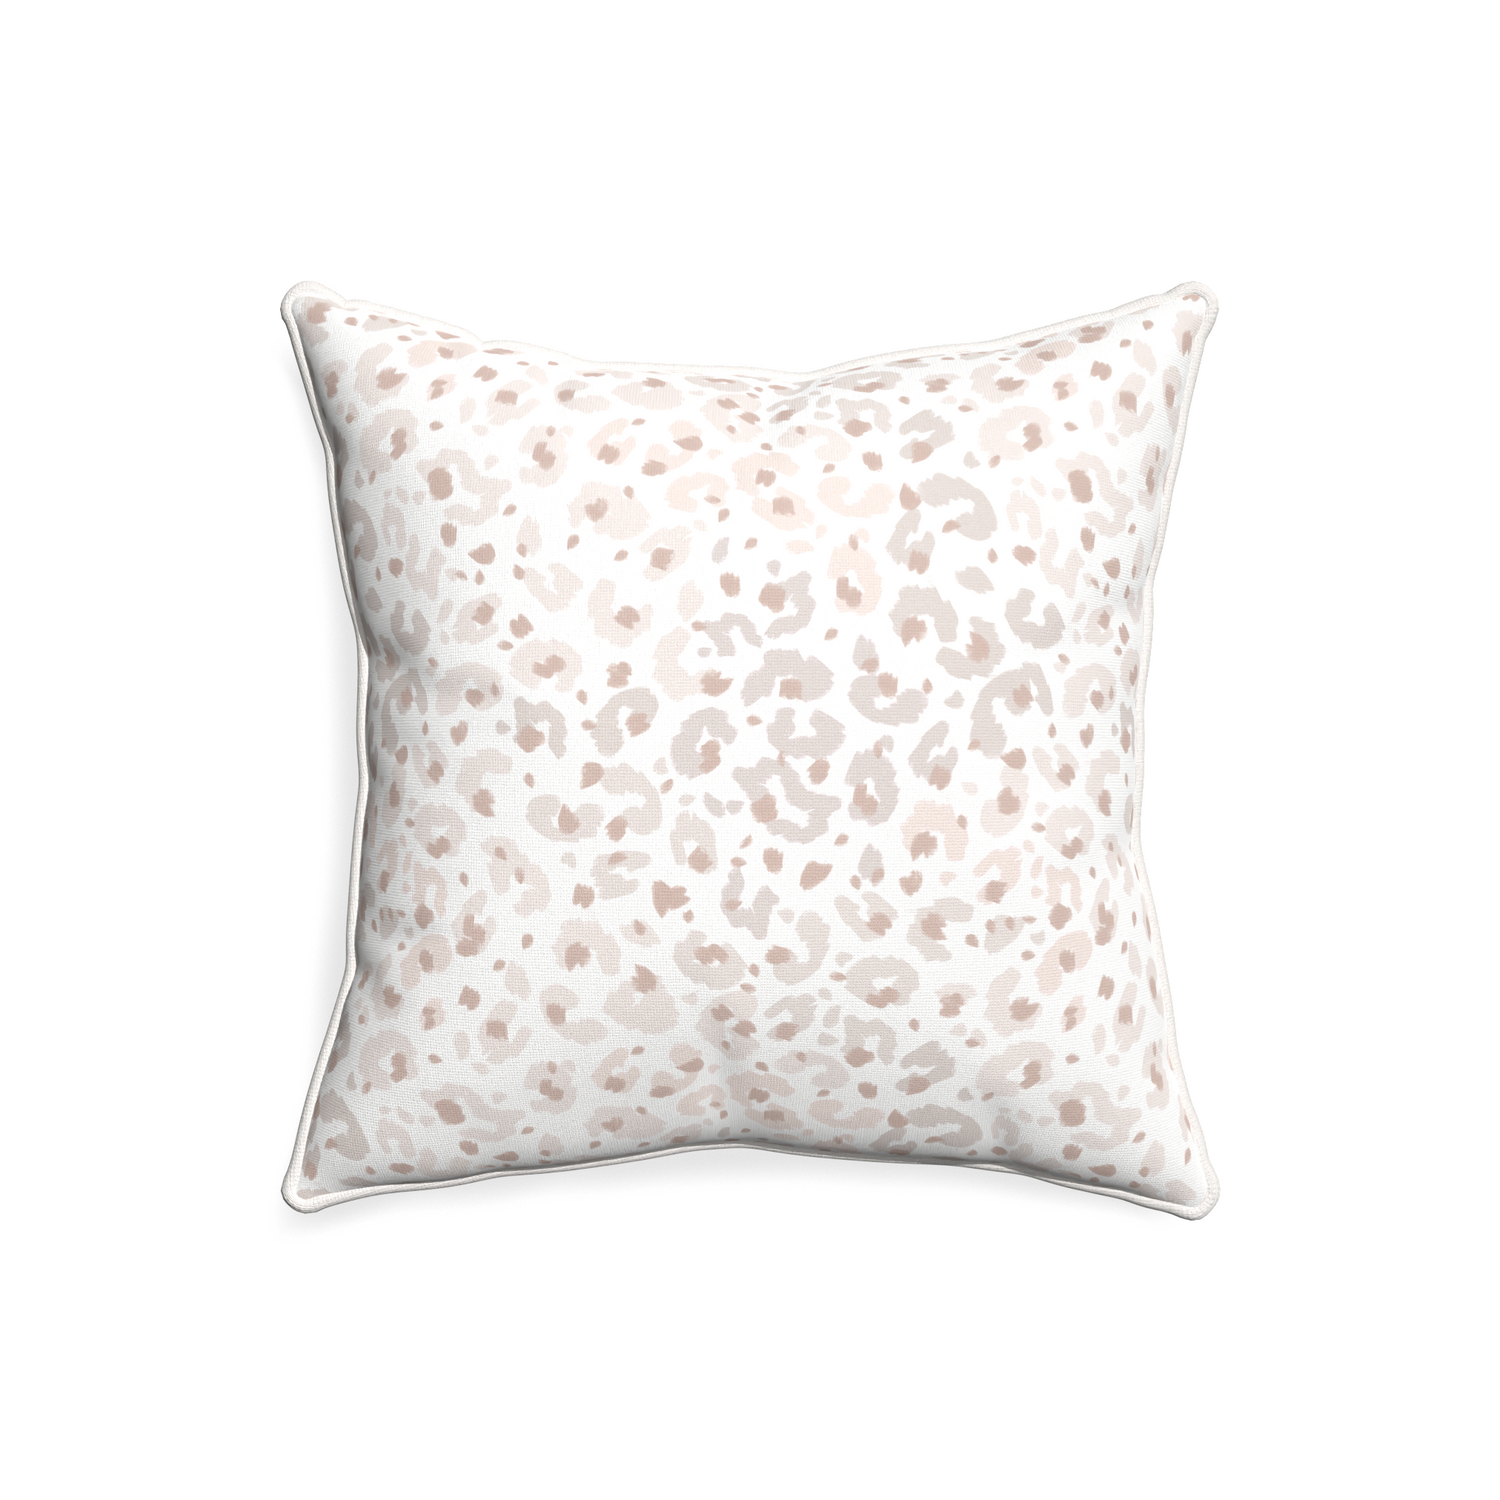 20-square rosie custom beige animal printpillow with snow piping on white background